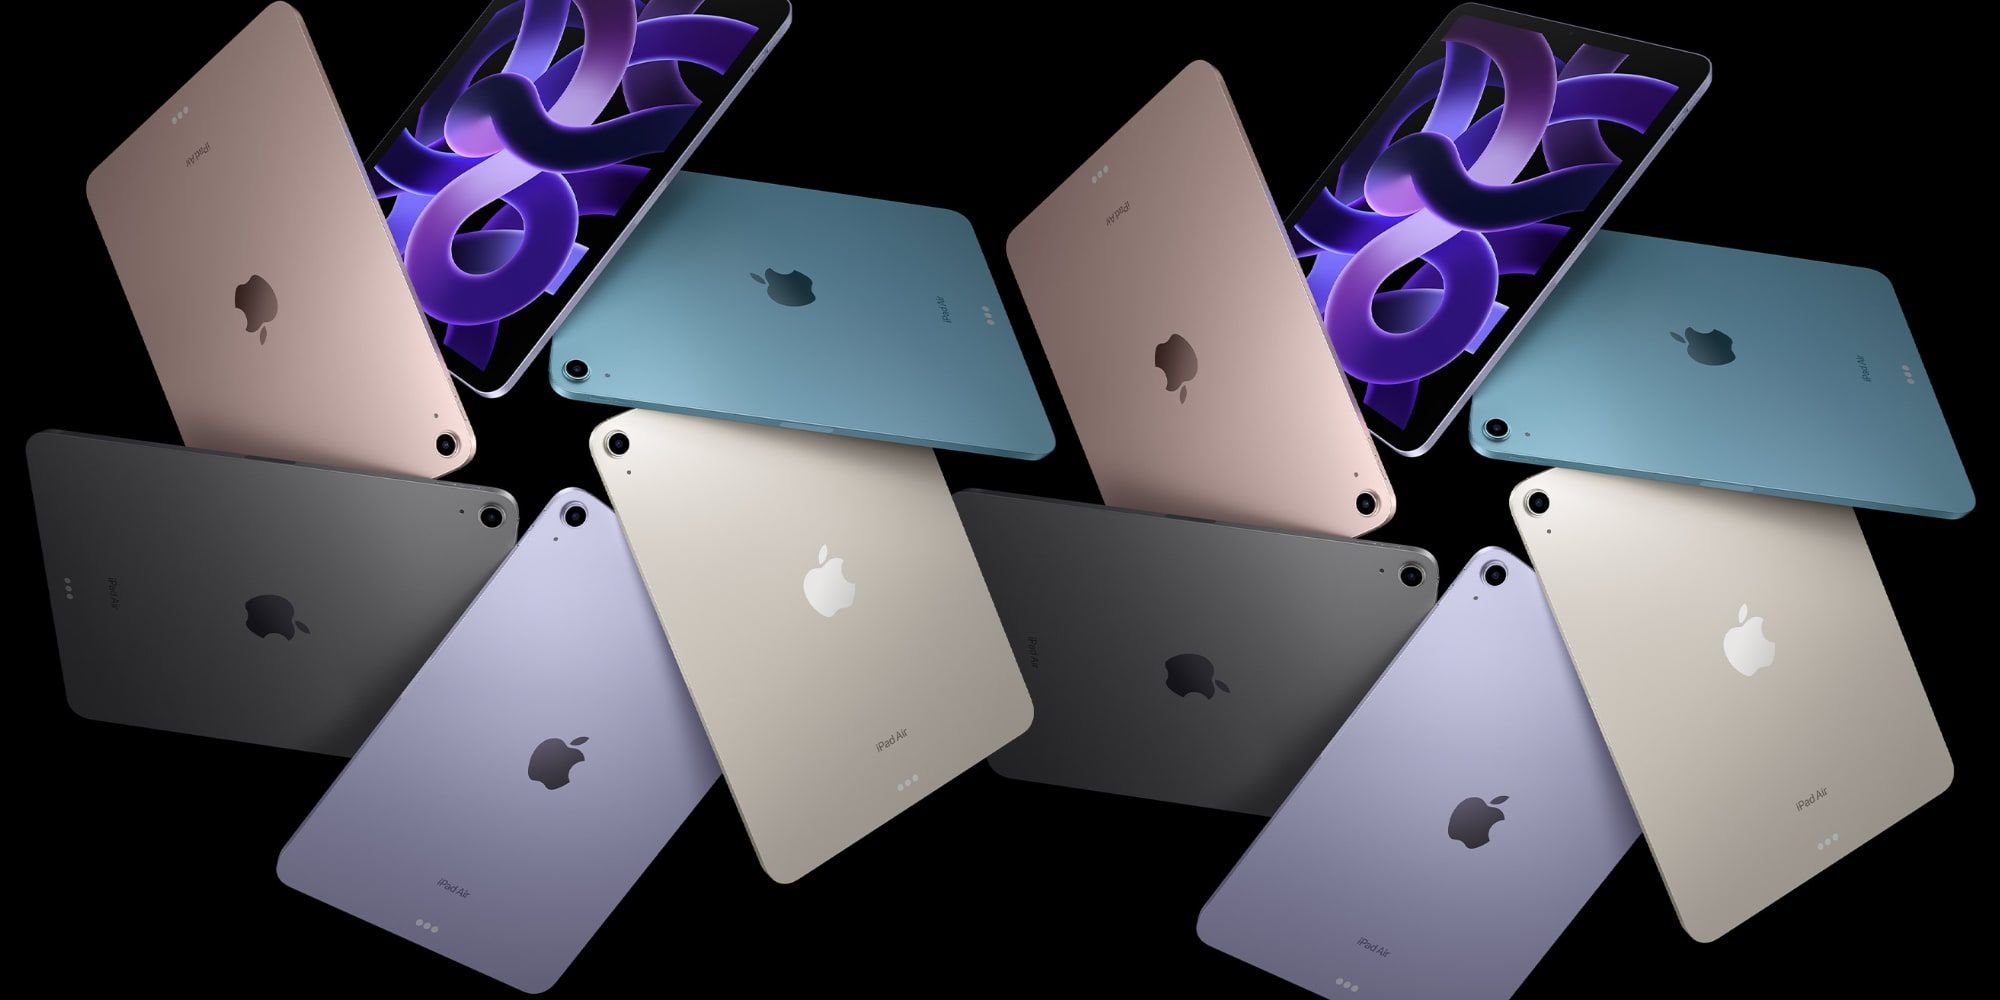 Save $100 On Apple's Newest iPad Air In Any Color